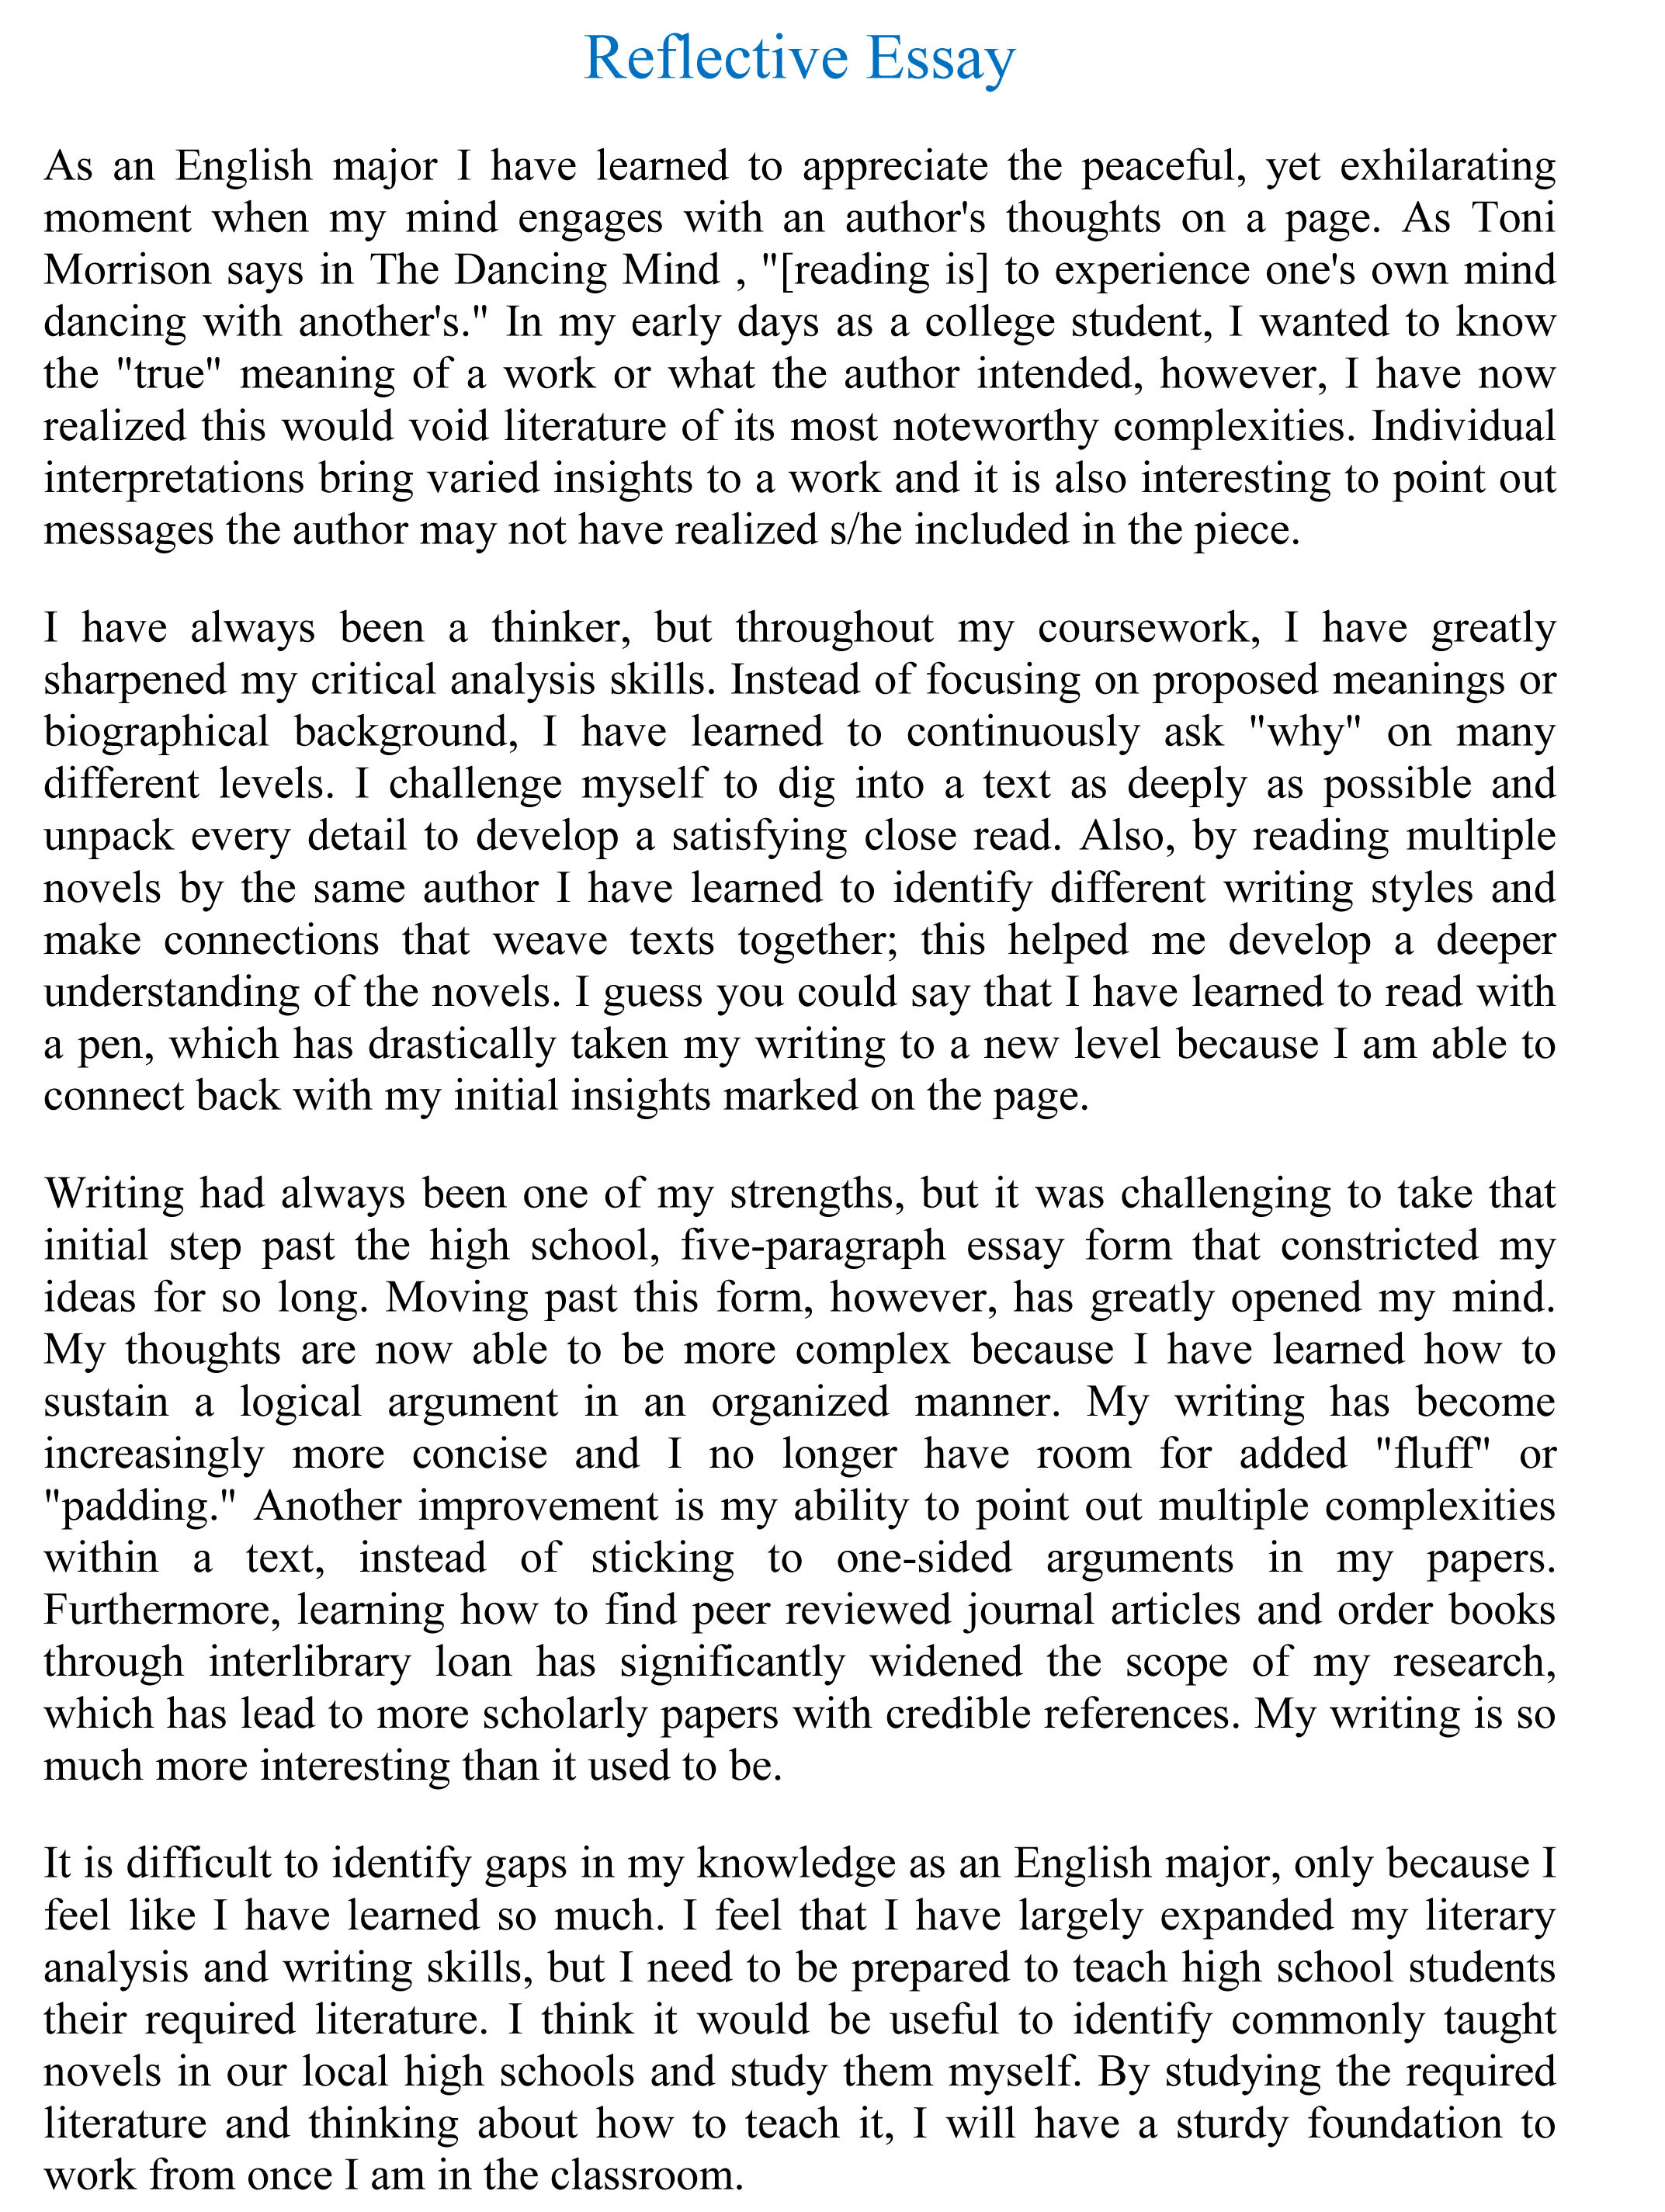 how to write reflective essay example